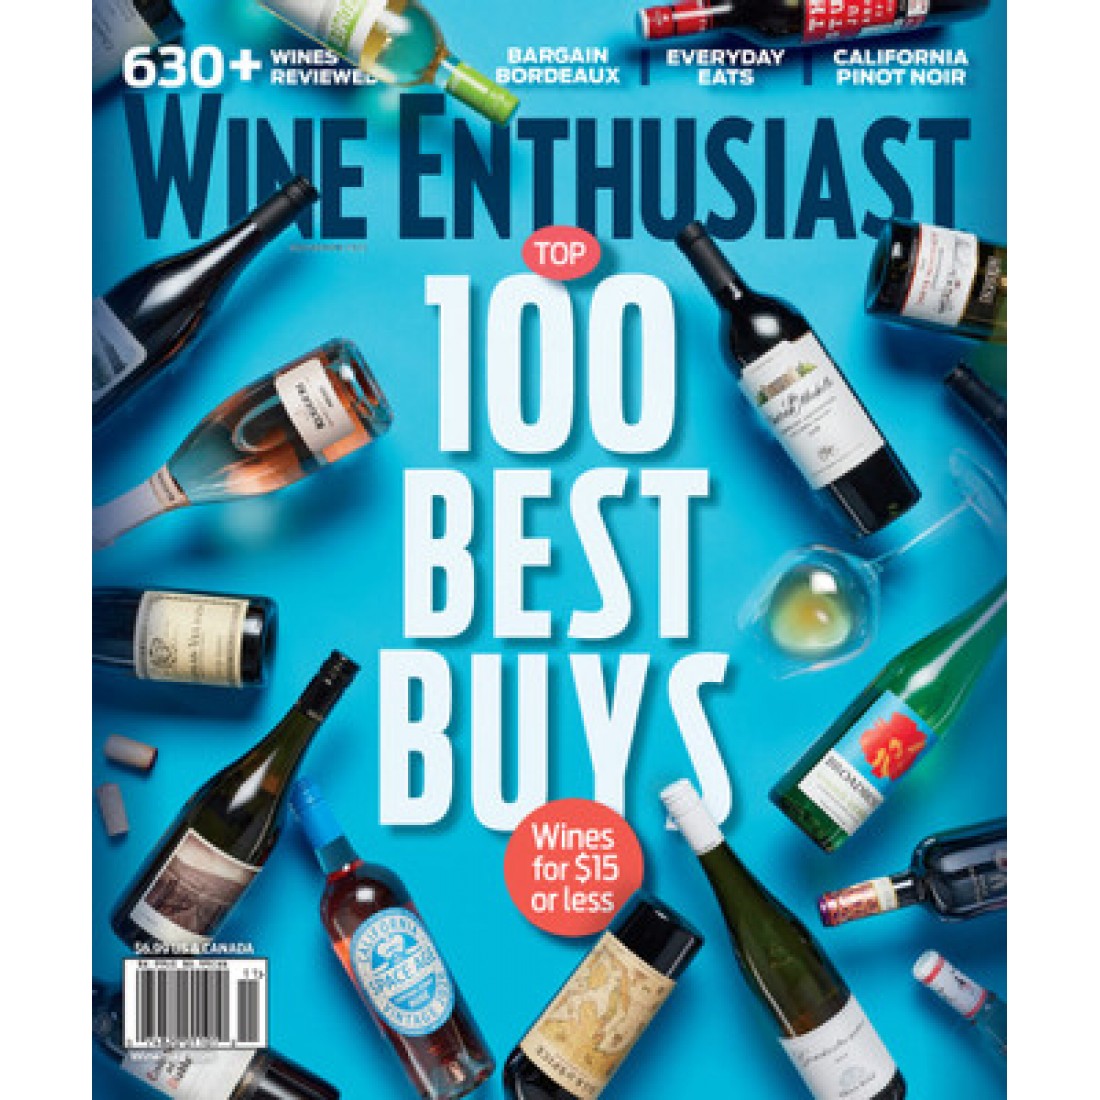 Subscribe or Renew Wine Enthusiast Magazine Subscription. Save 57